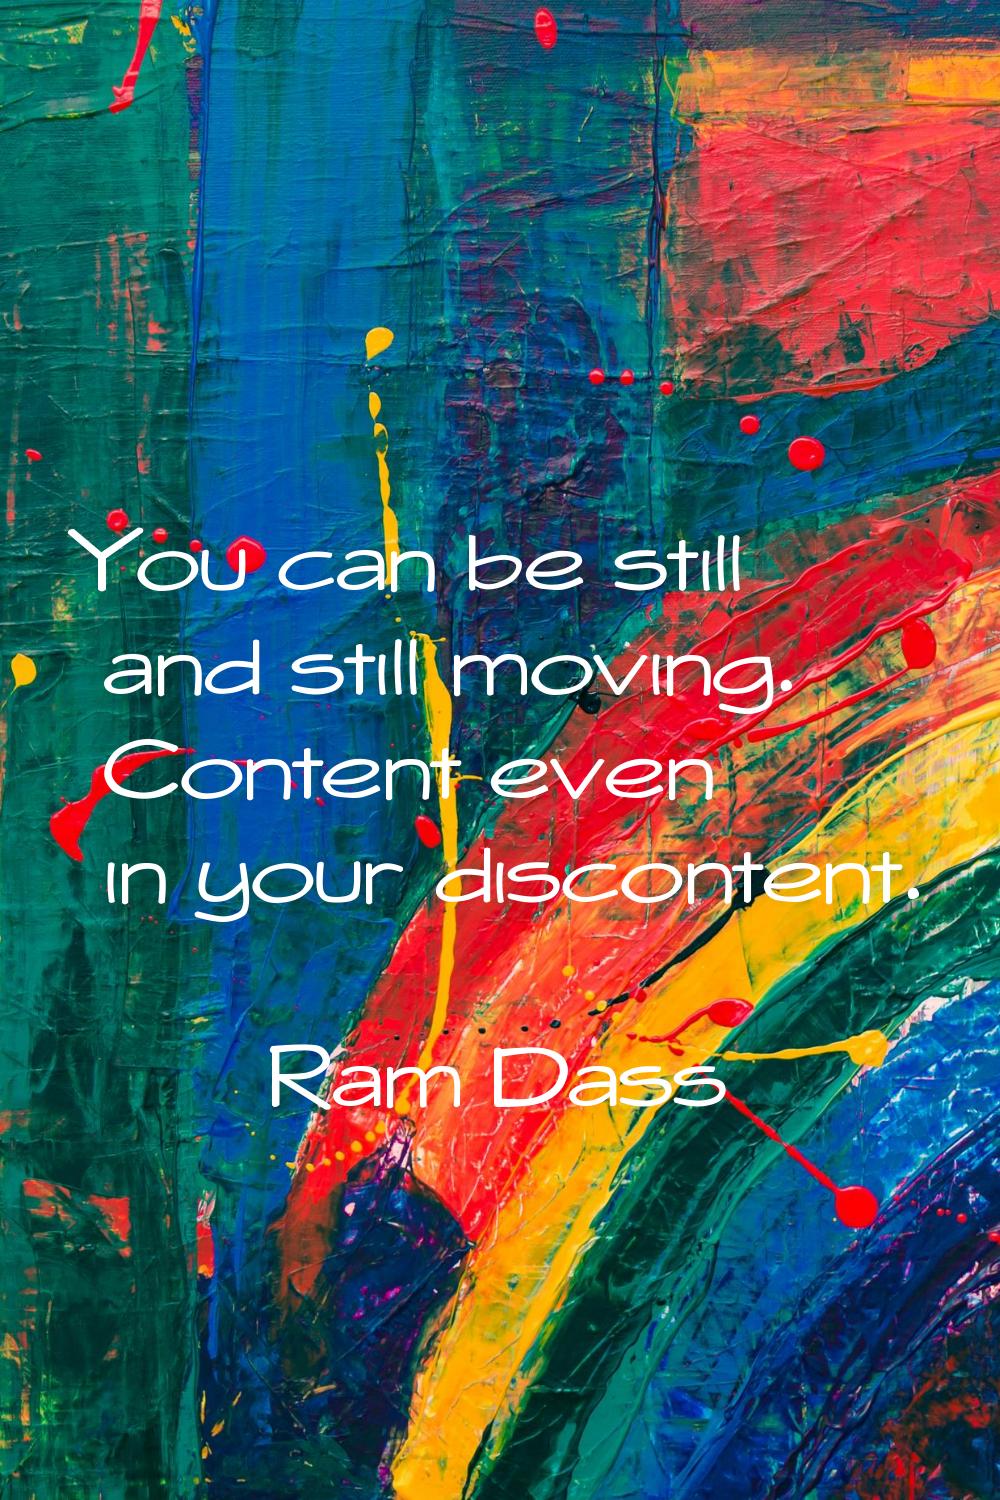 You can be still and still moving. Content even in your discontent.